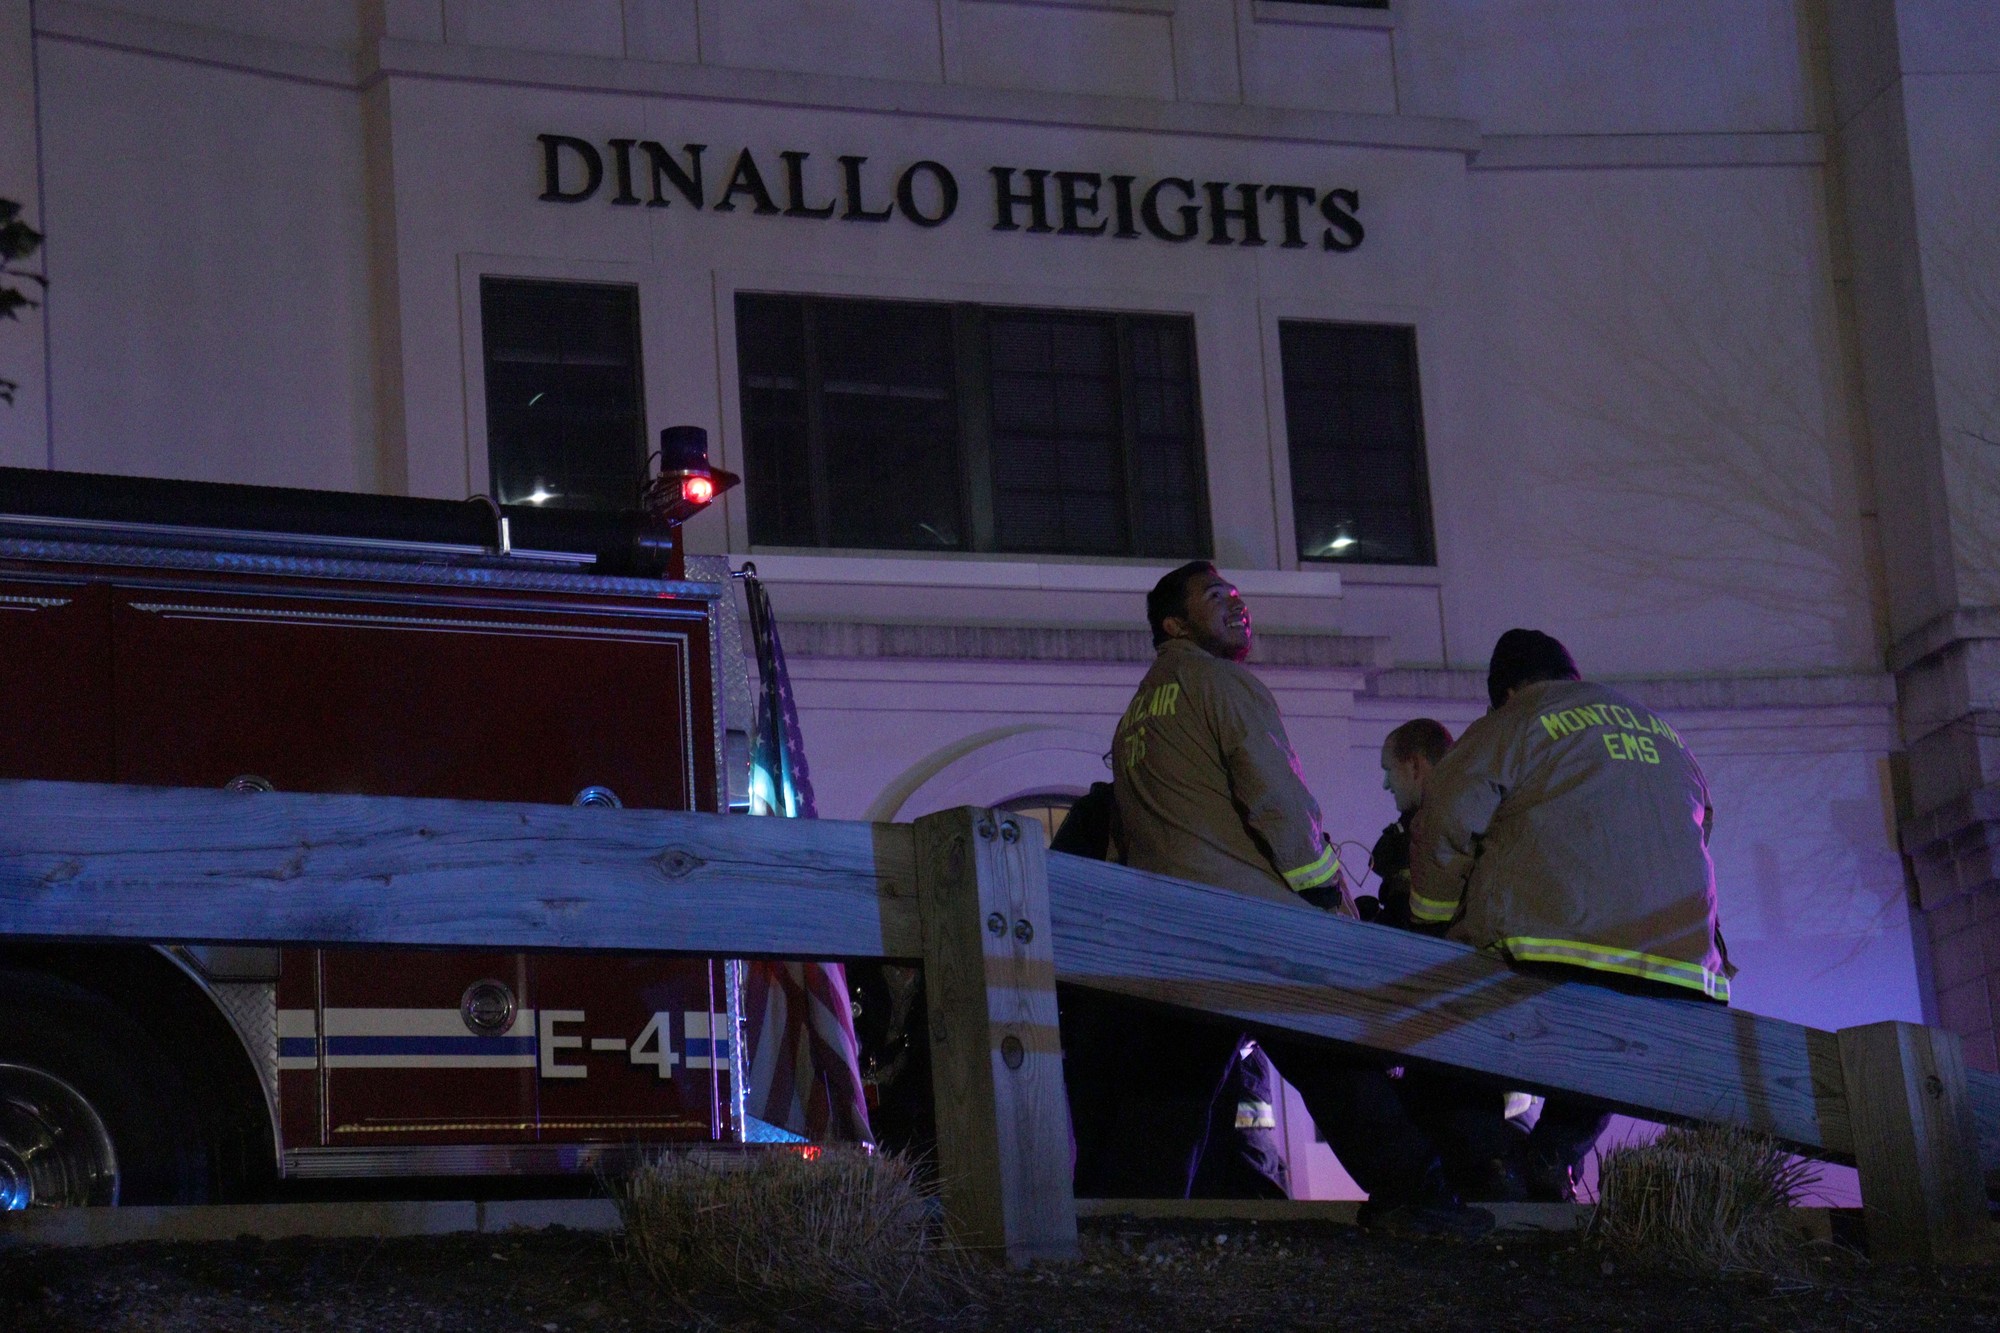 Montclair Emergency Medical Services (EMS) members waiting outside Dinallo Heights as police helped evaluate damages. John LaRosa | The Montclarion